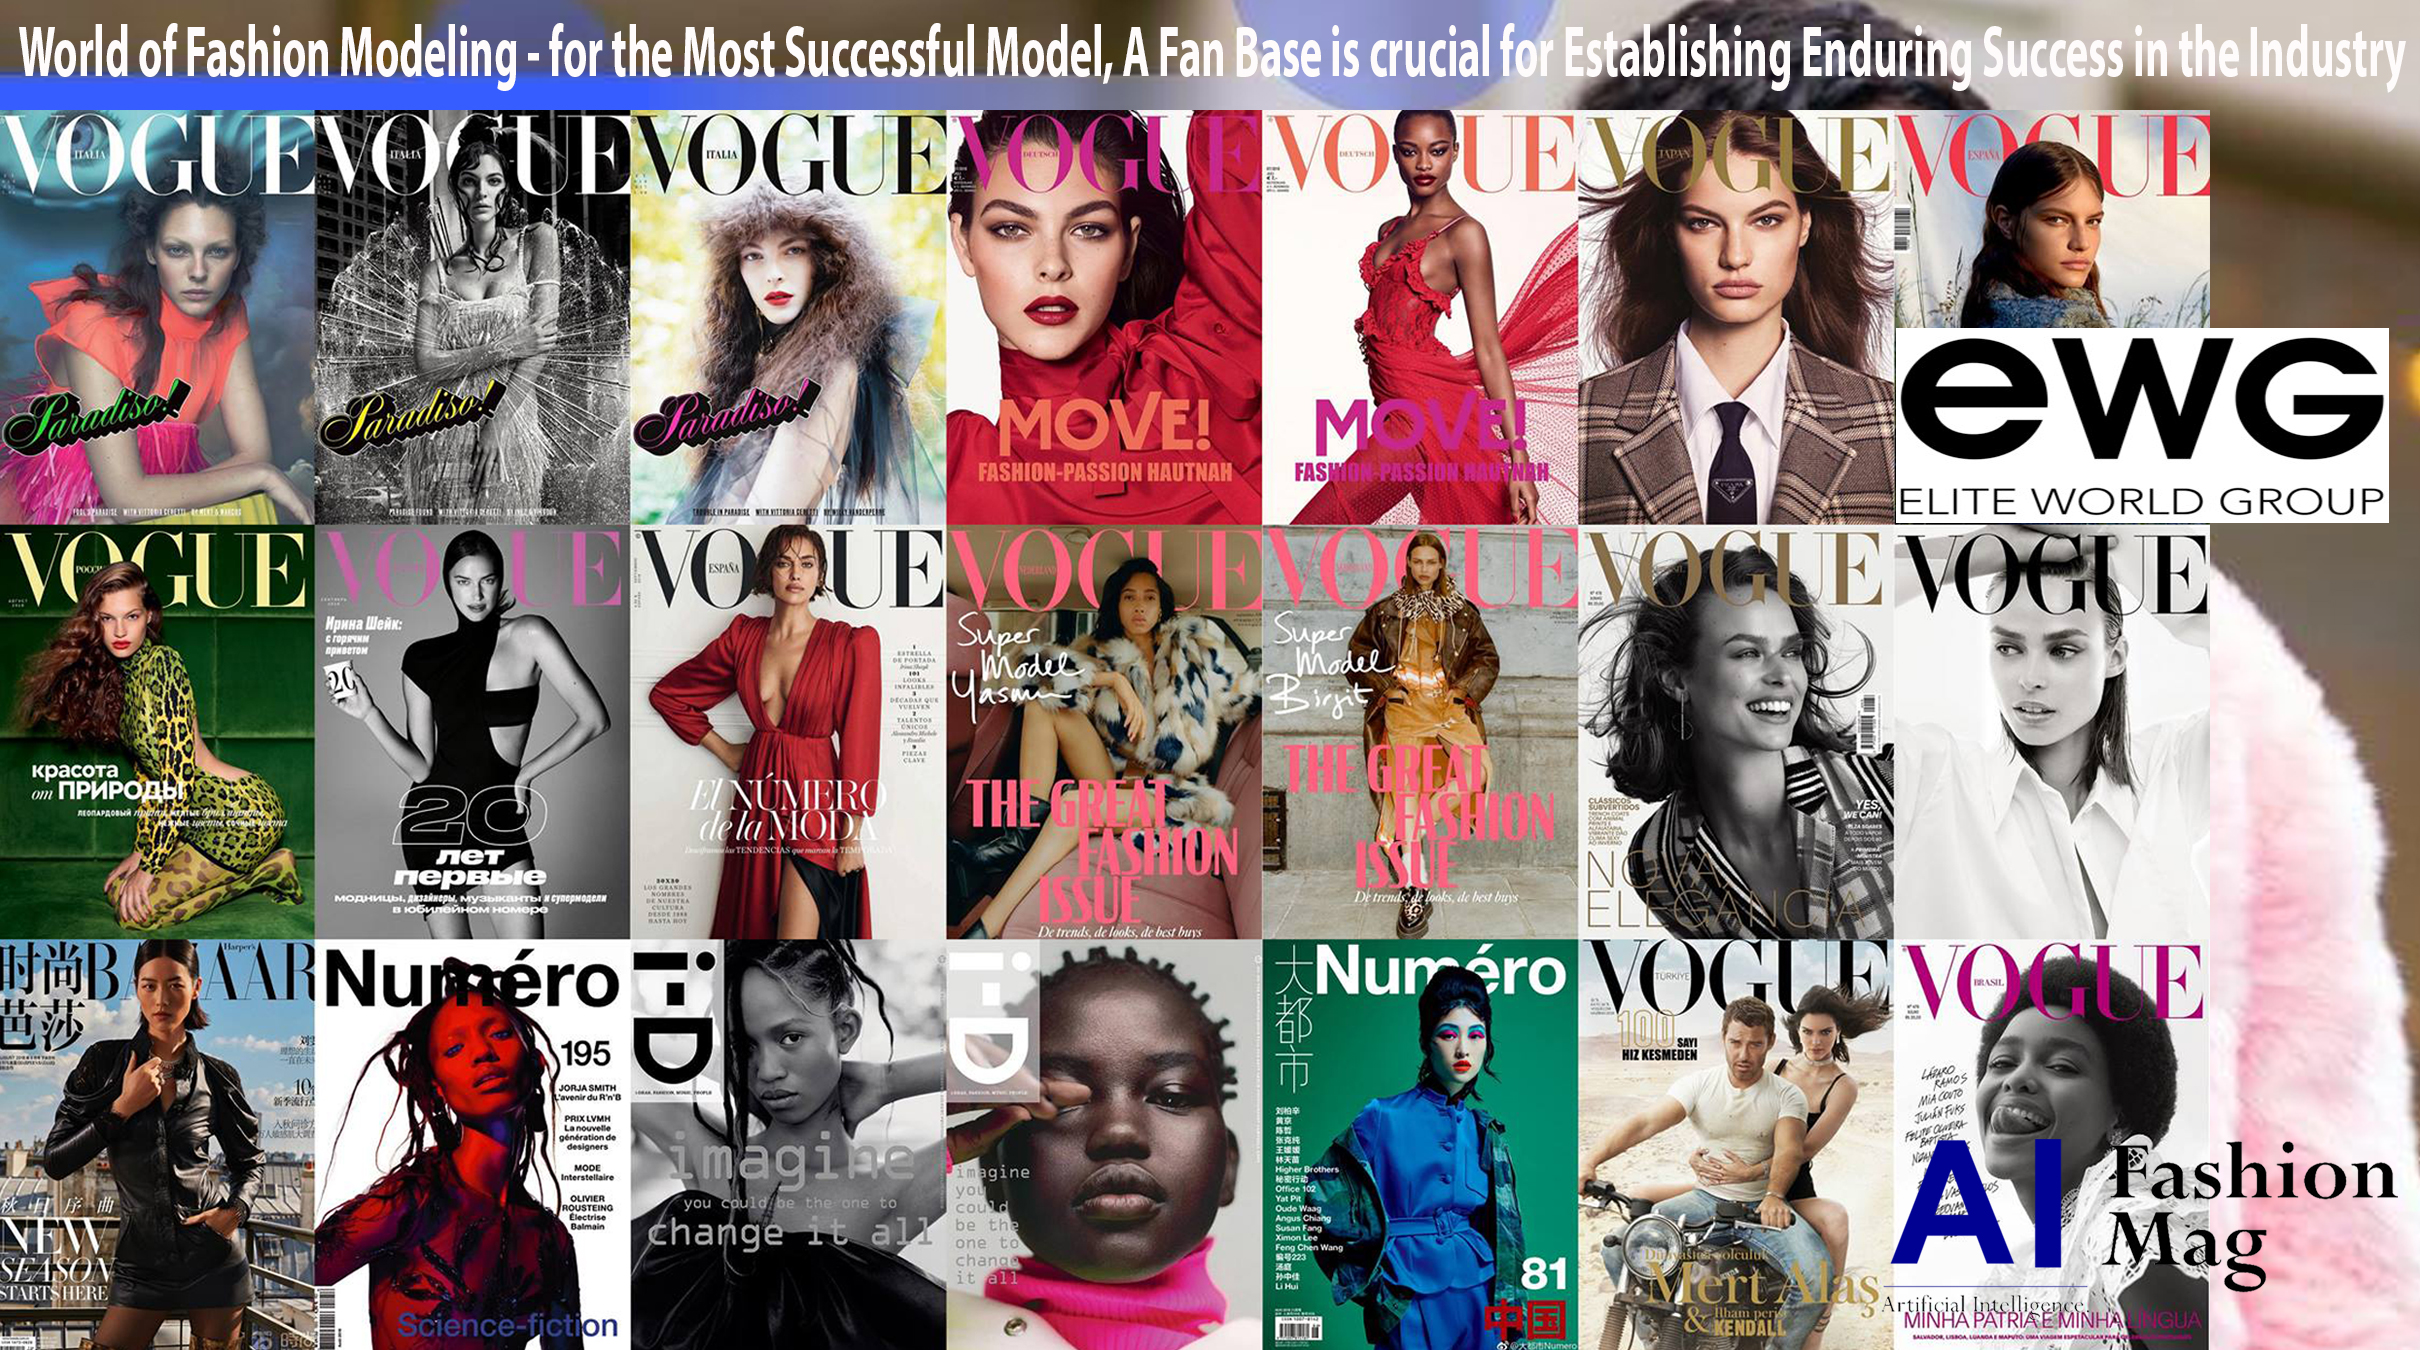 AFRICA-VOGUE-COVER-World-of-Fashion-Modeling-for-the-Most-Successful-Model-A-Fan-Base-is-crucial-for-Establishing-Enduring-Success-in-the-Industry -DN-AFRICA-Media-Partner